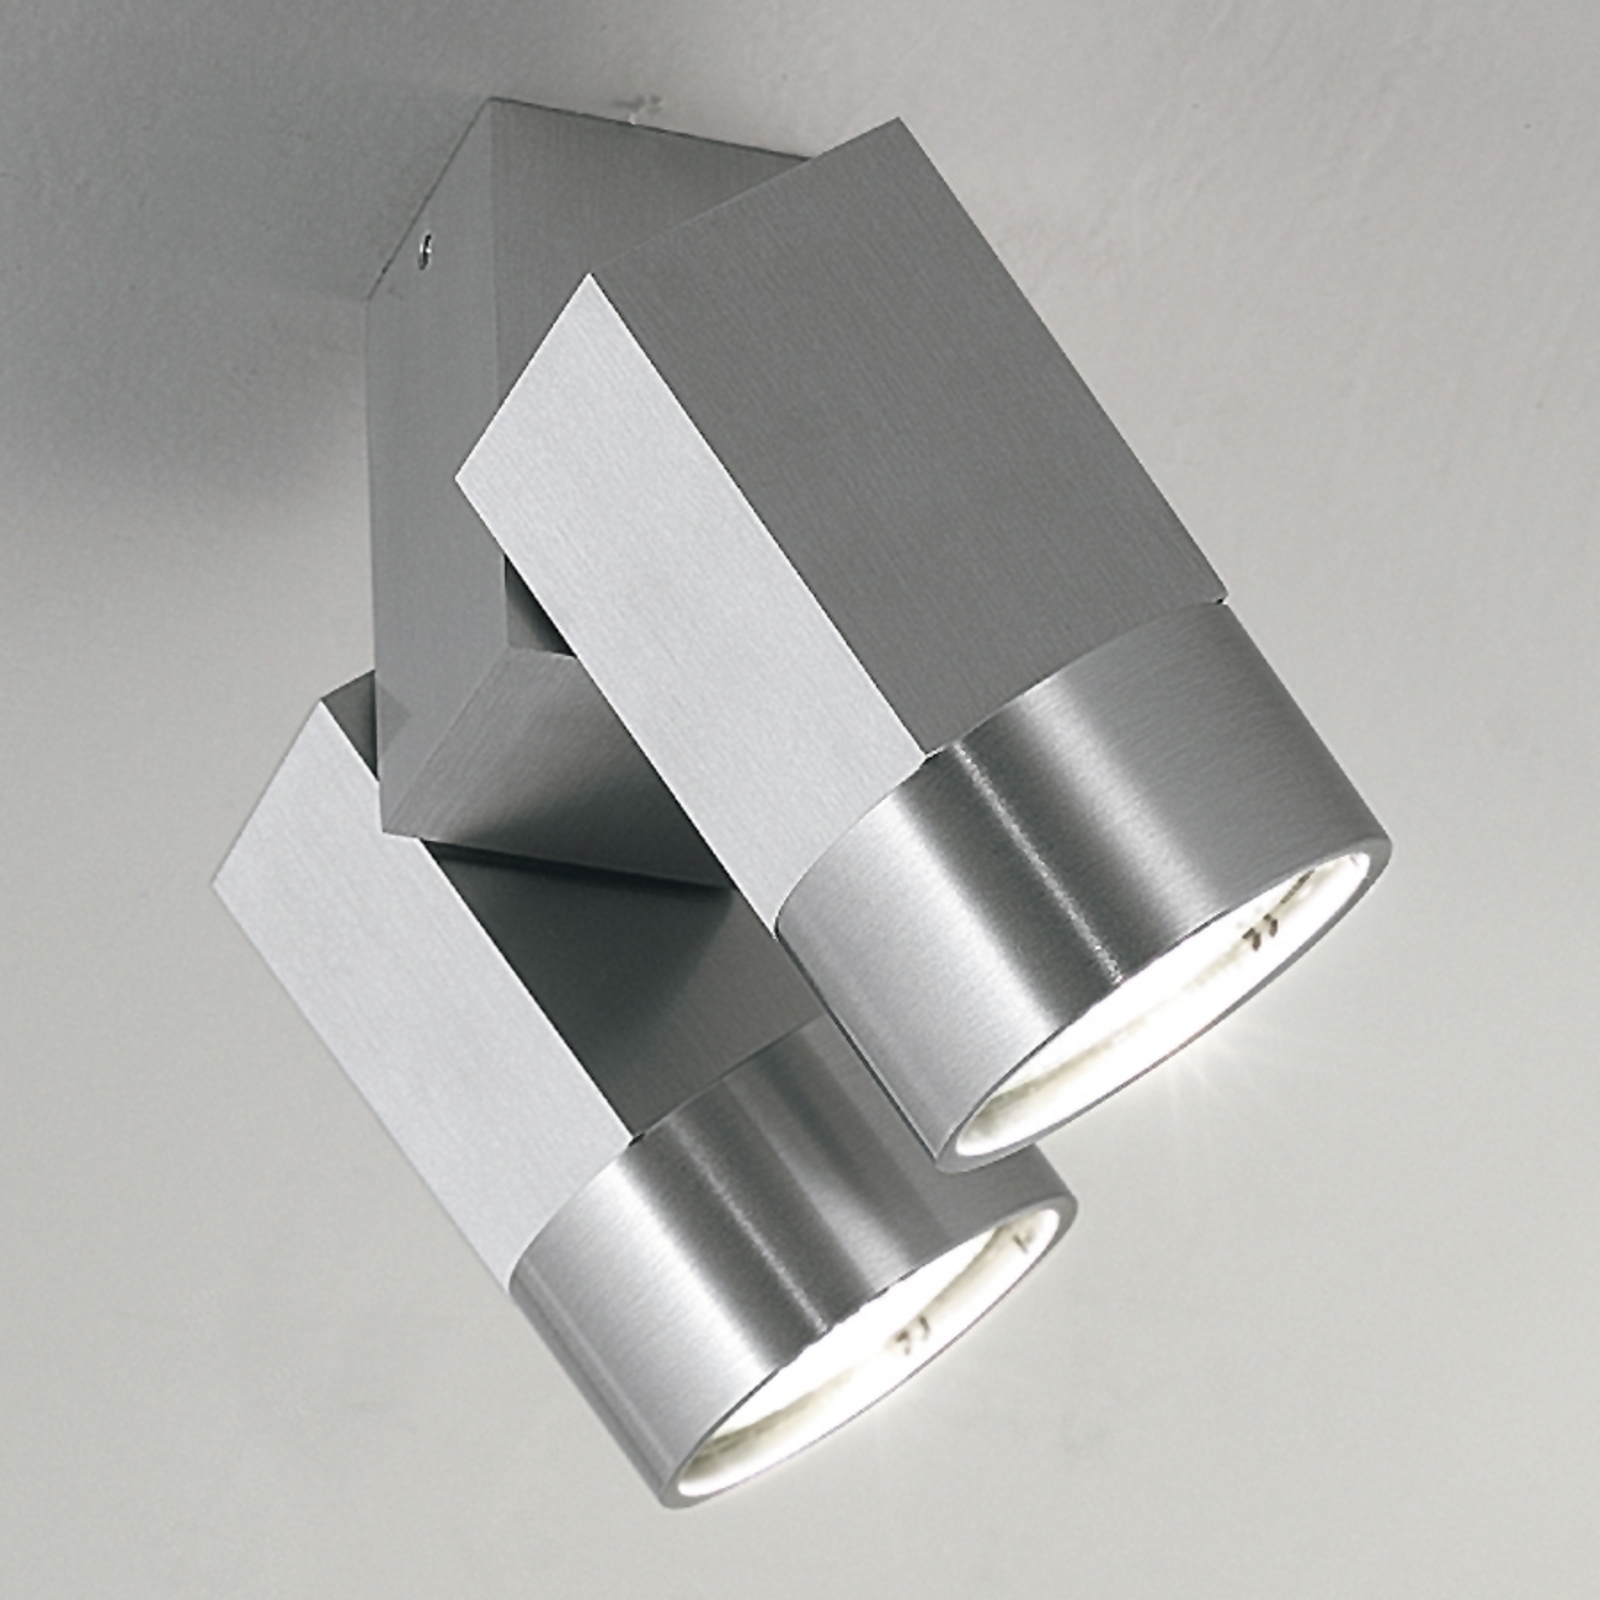 STYLE DUO ceiling or wall spotlight, two-bulb